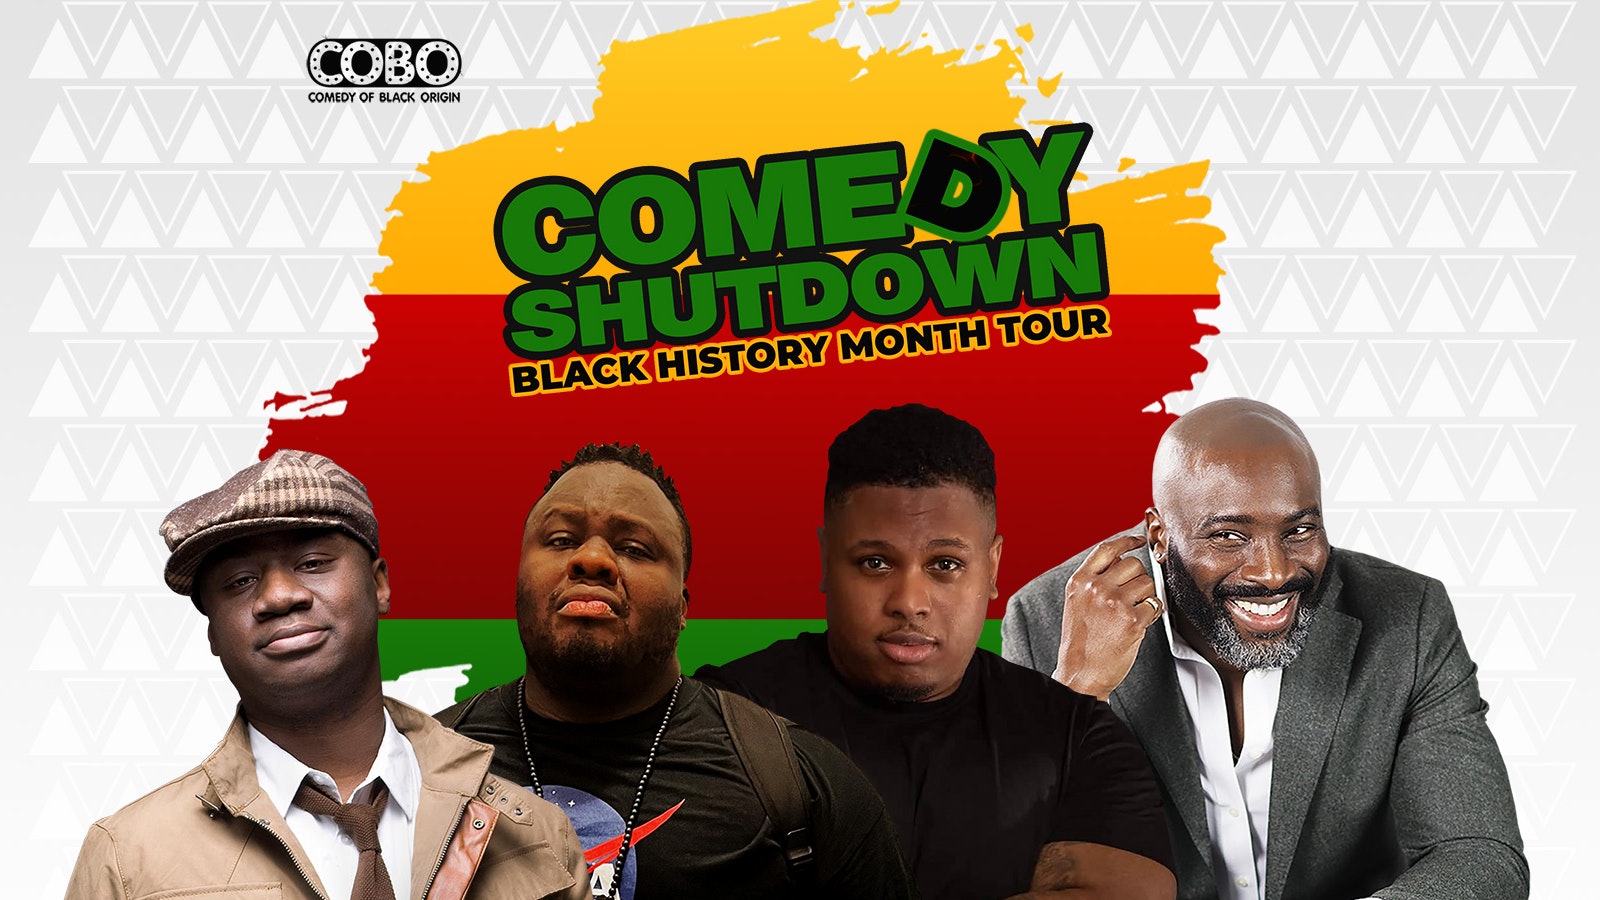 COBO : Comedy Shutdown Black History Month Special – Solihull